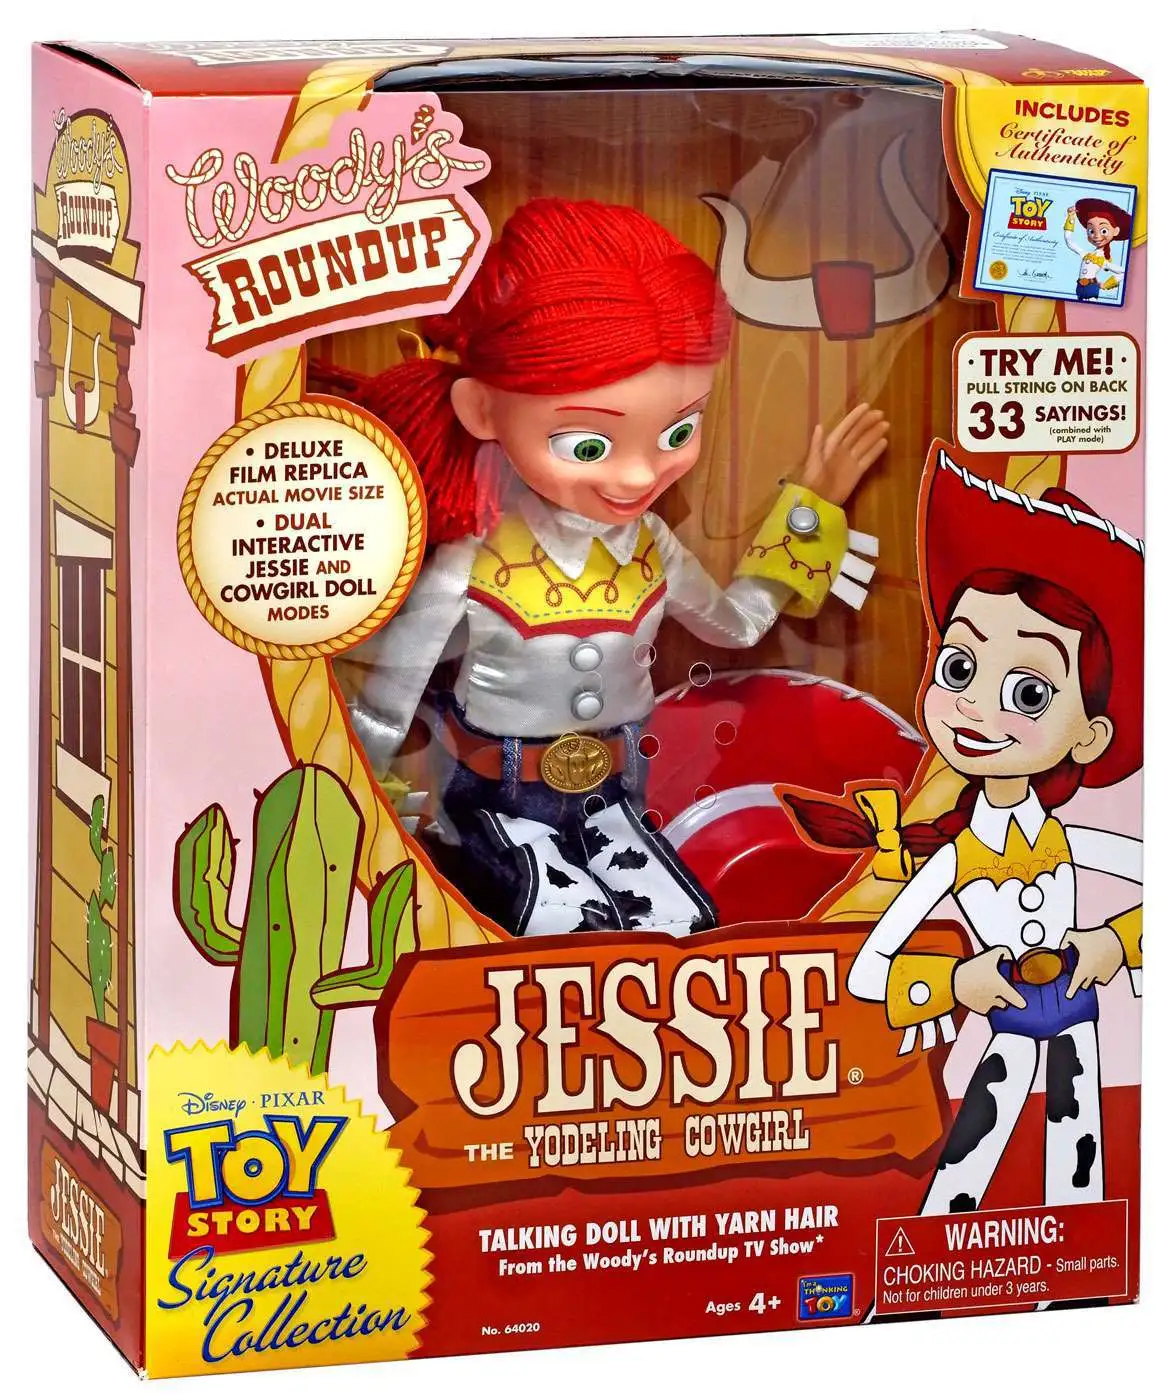 TOY STORY SIGNATURE COLLECTION JESSIE THE YODELING COWGIRL